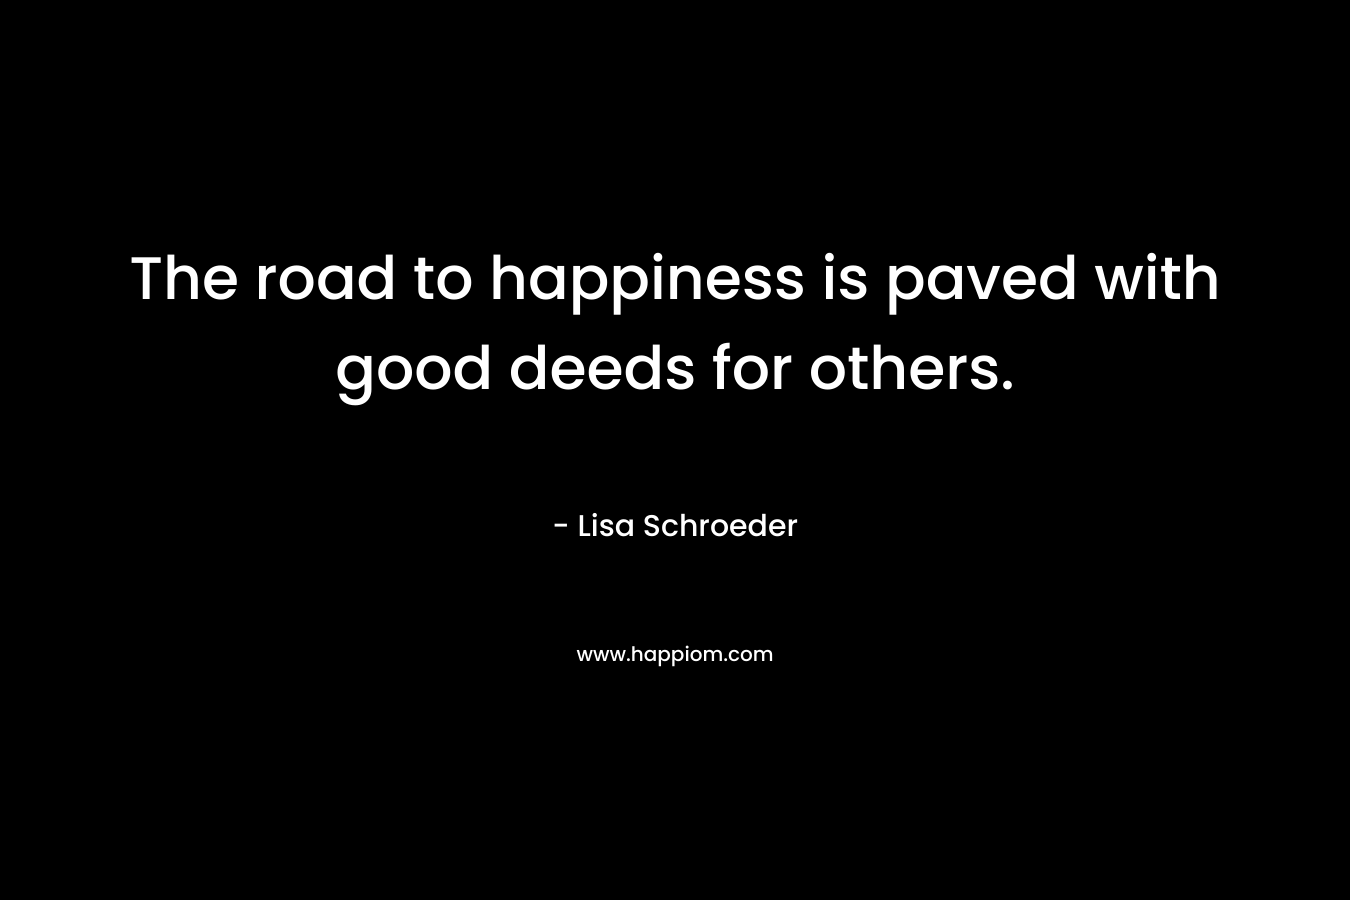 The road to happiness is paved with good deeds for others. – Lisa Schroeder